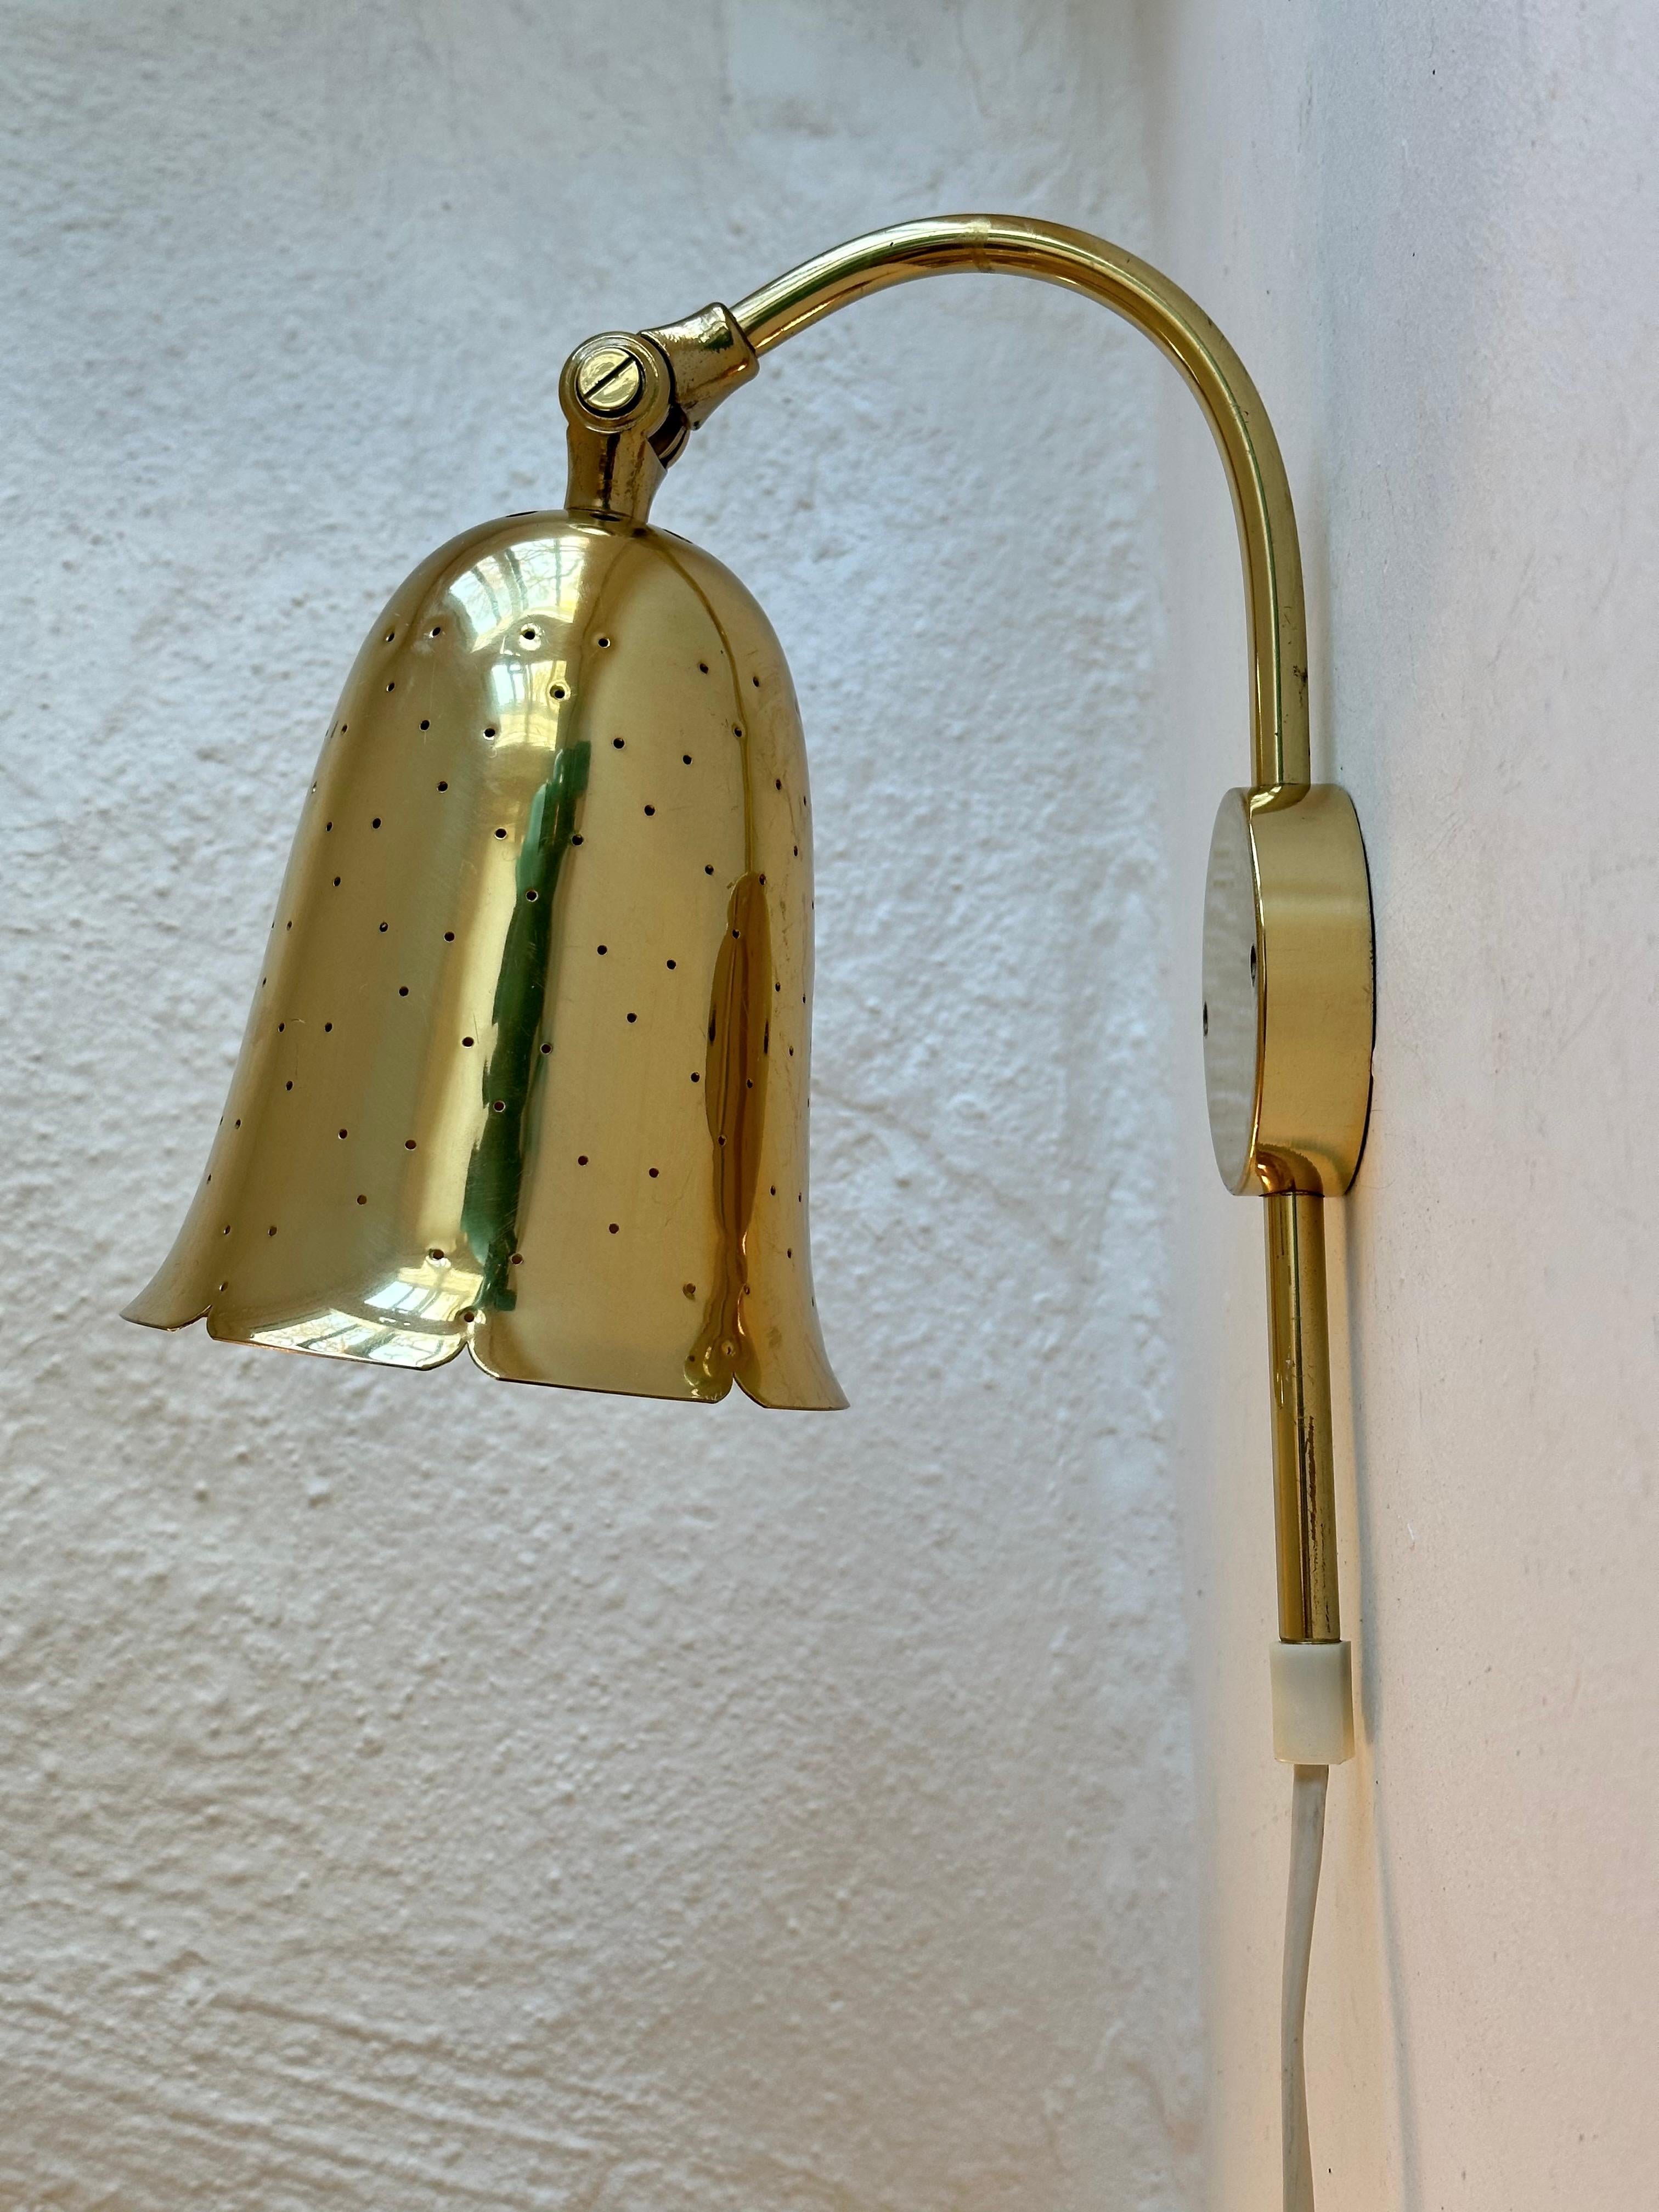 Rare wall lamps in brass produced by Boréns in Borås, Sweden. Perforated brass shades creating a beautiful pattern when lit. Adjustable height and angle. Model No. 6972.